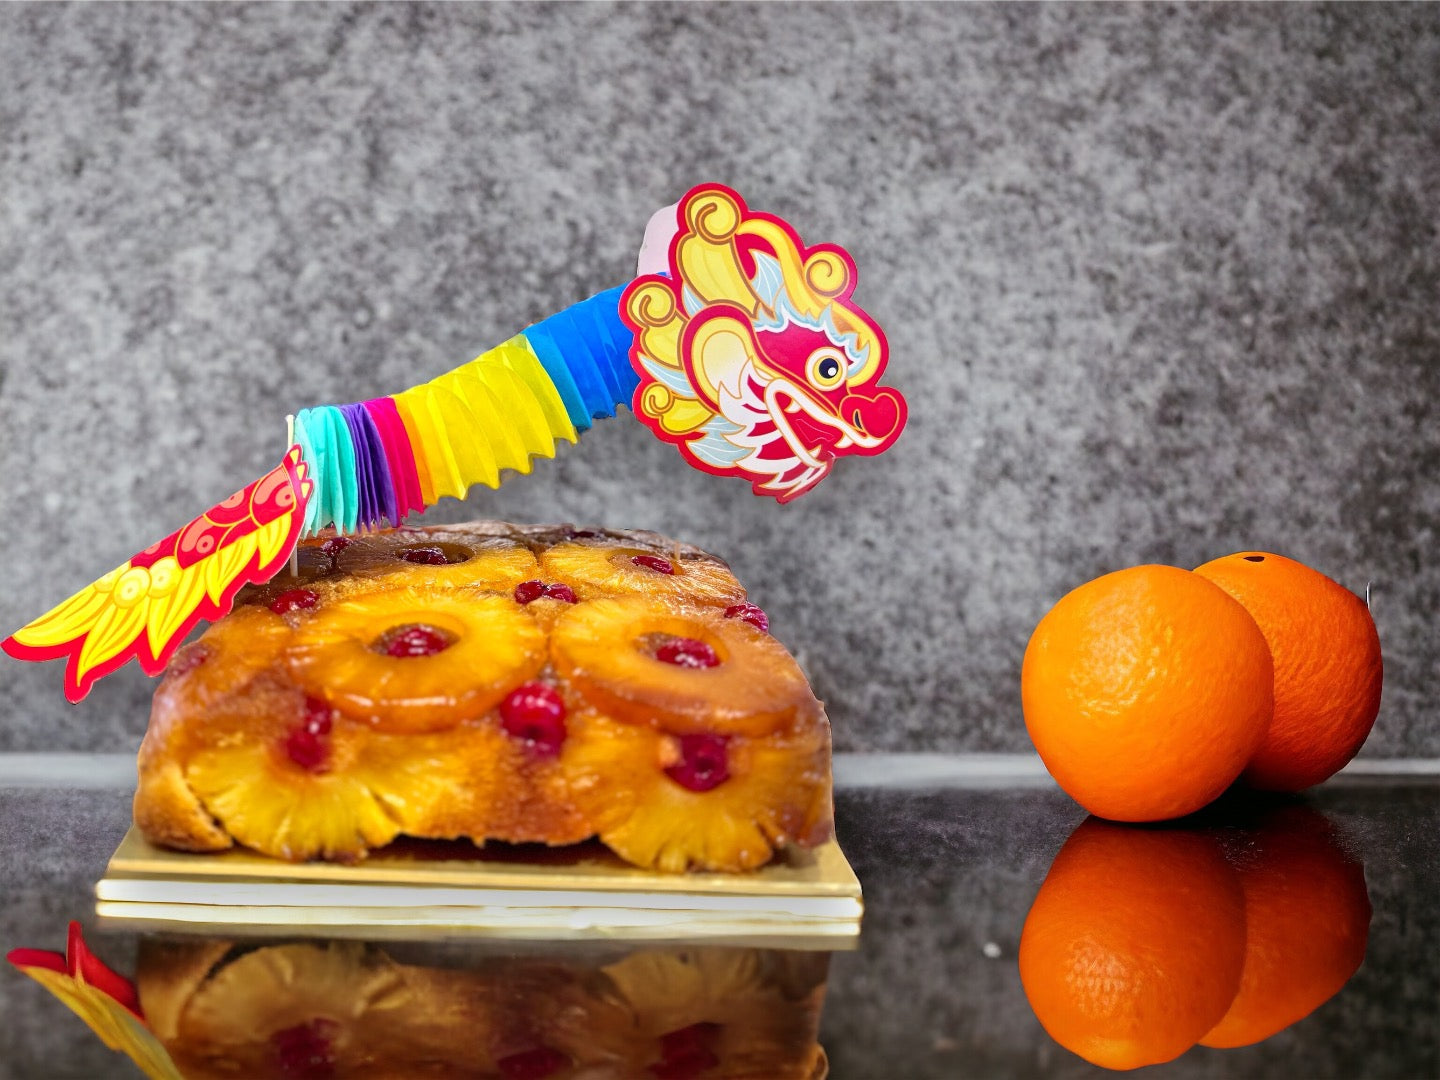 The pineapple, revered for its association with wealth and luck, is the highlight of this Lunar New Year dessert